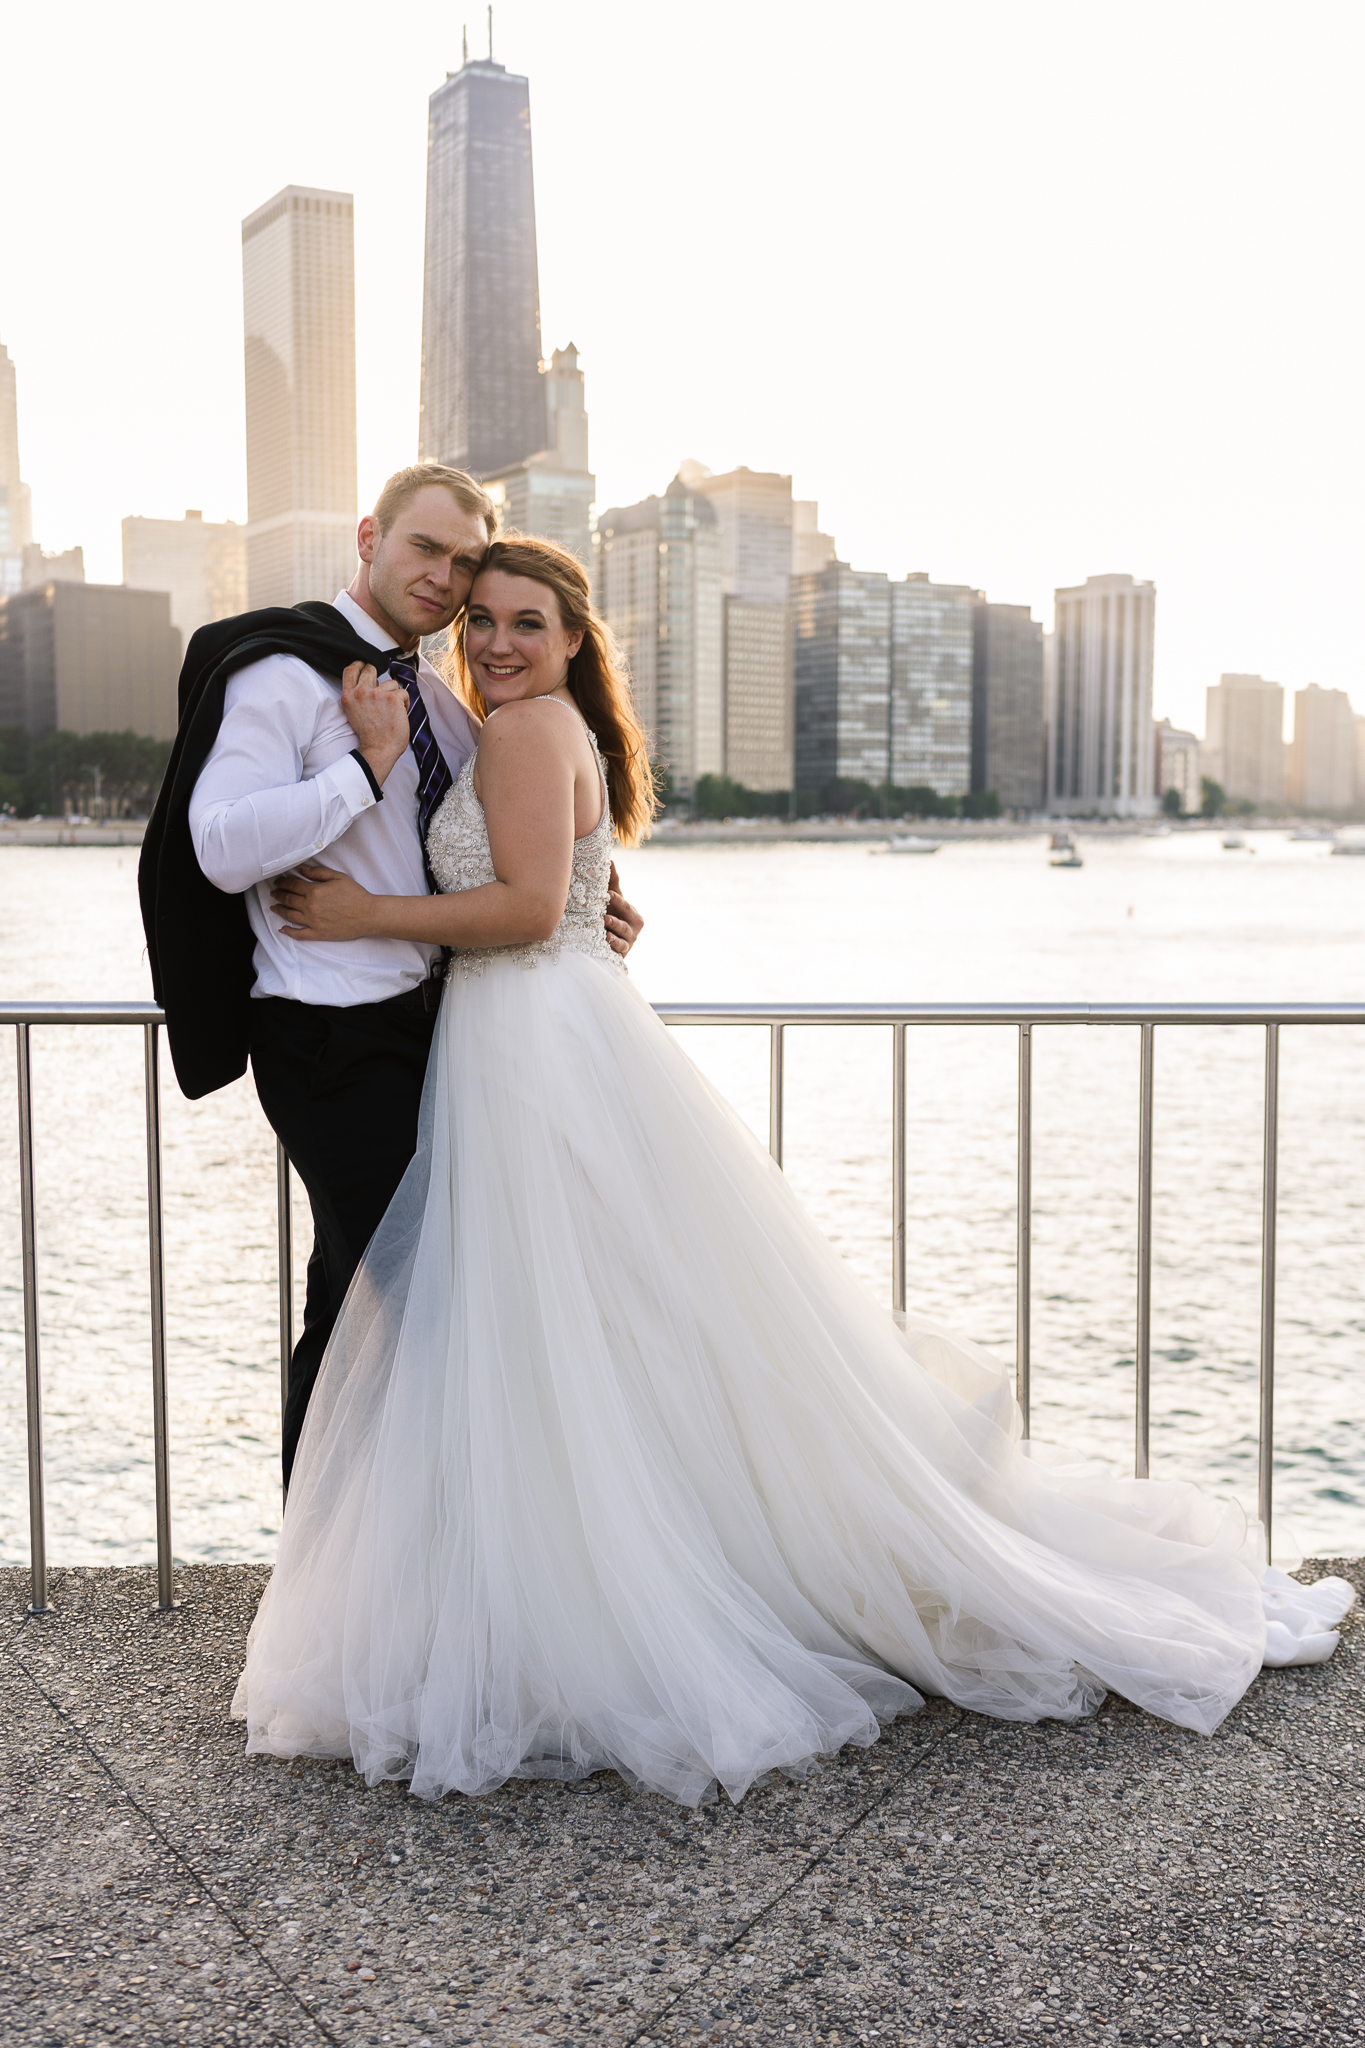 bride and groom standing in front of the chicago skyline at their outdoor wedding venues chicago